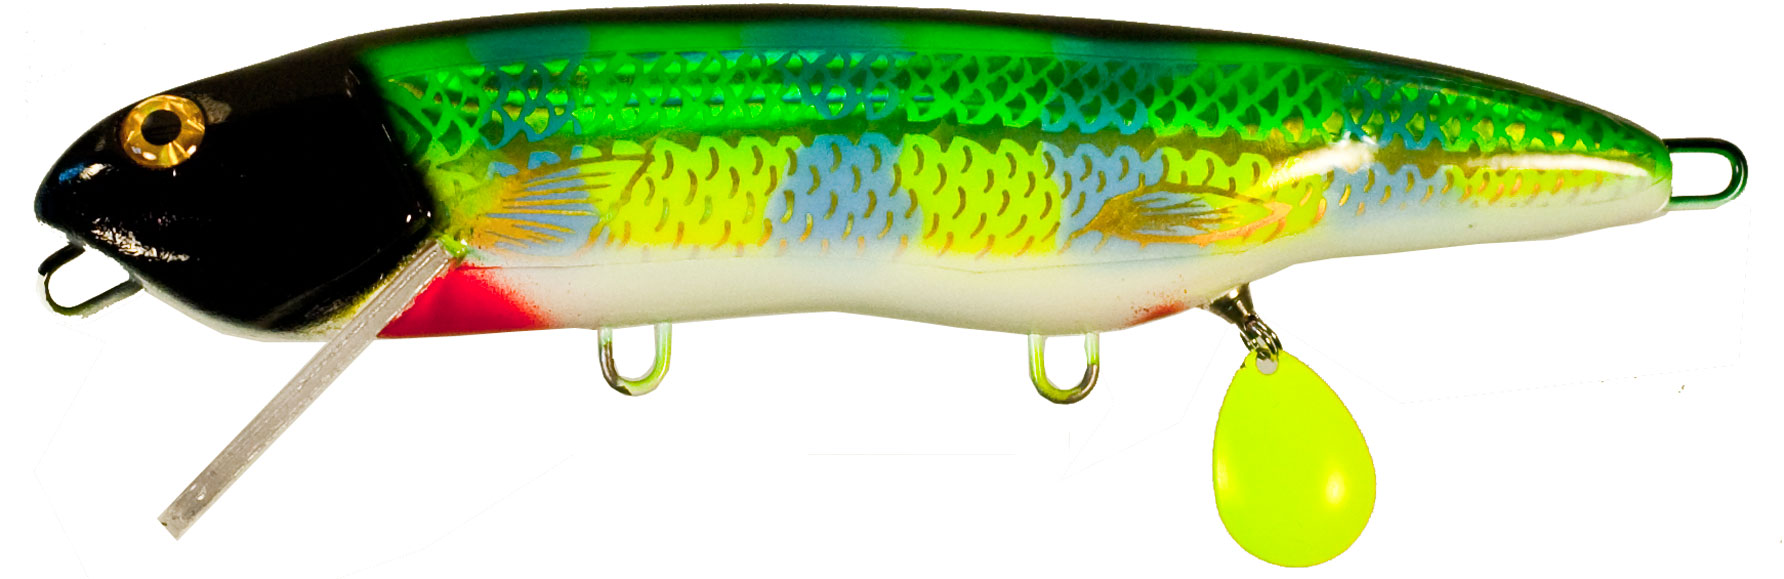 7" Vexer Sennett Tackle Co Twitch Bait Musky Pike e Live Image Crappie VX-06-L 